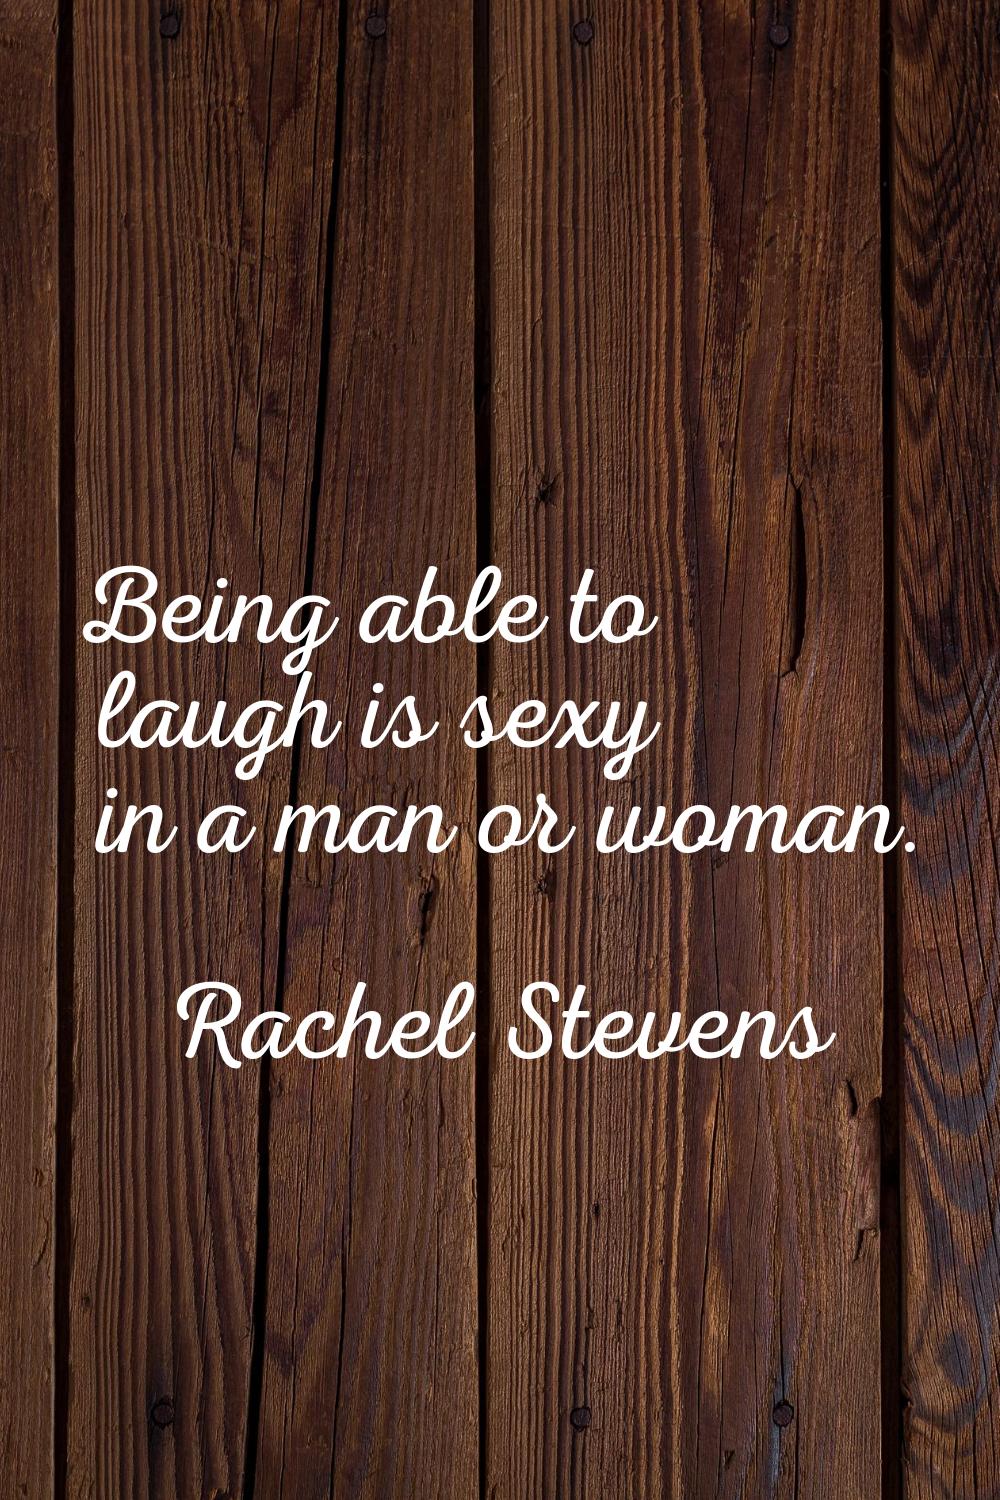 Being able to laugh is sexy in a man or woman.